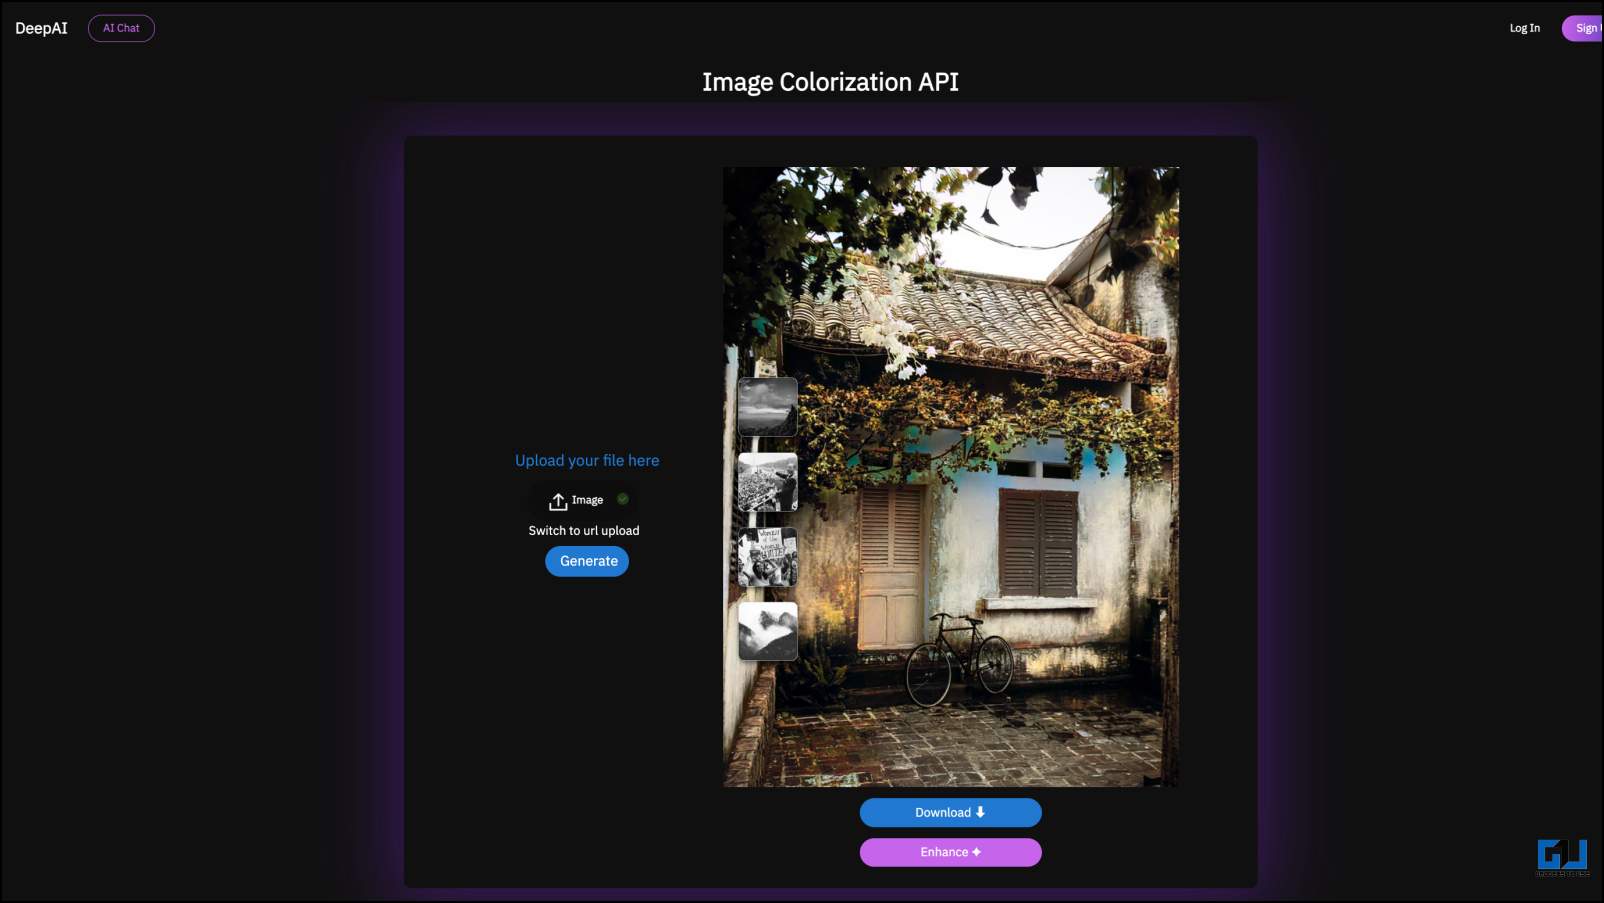 colorize black and white photos with Deep.AI